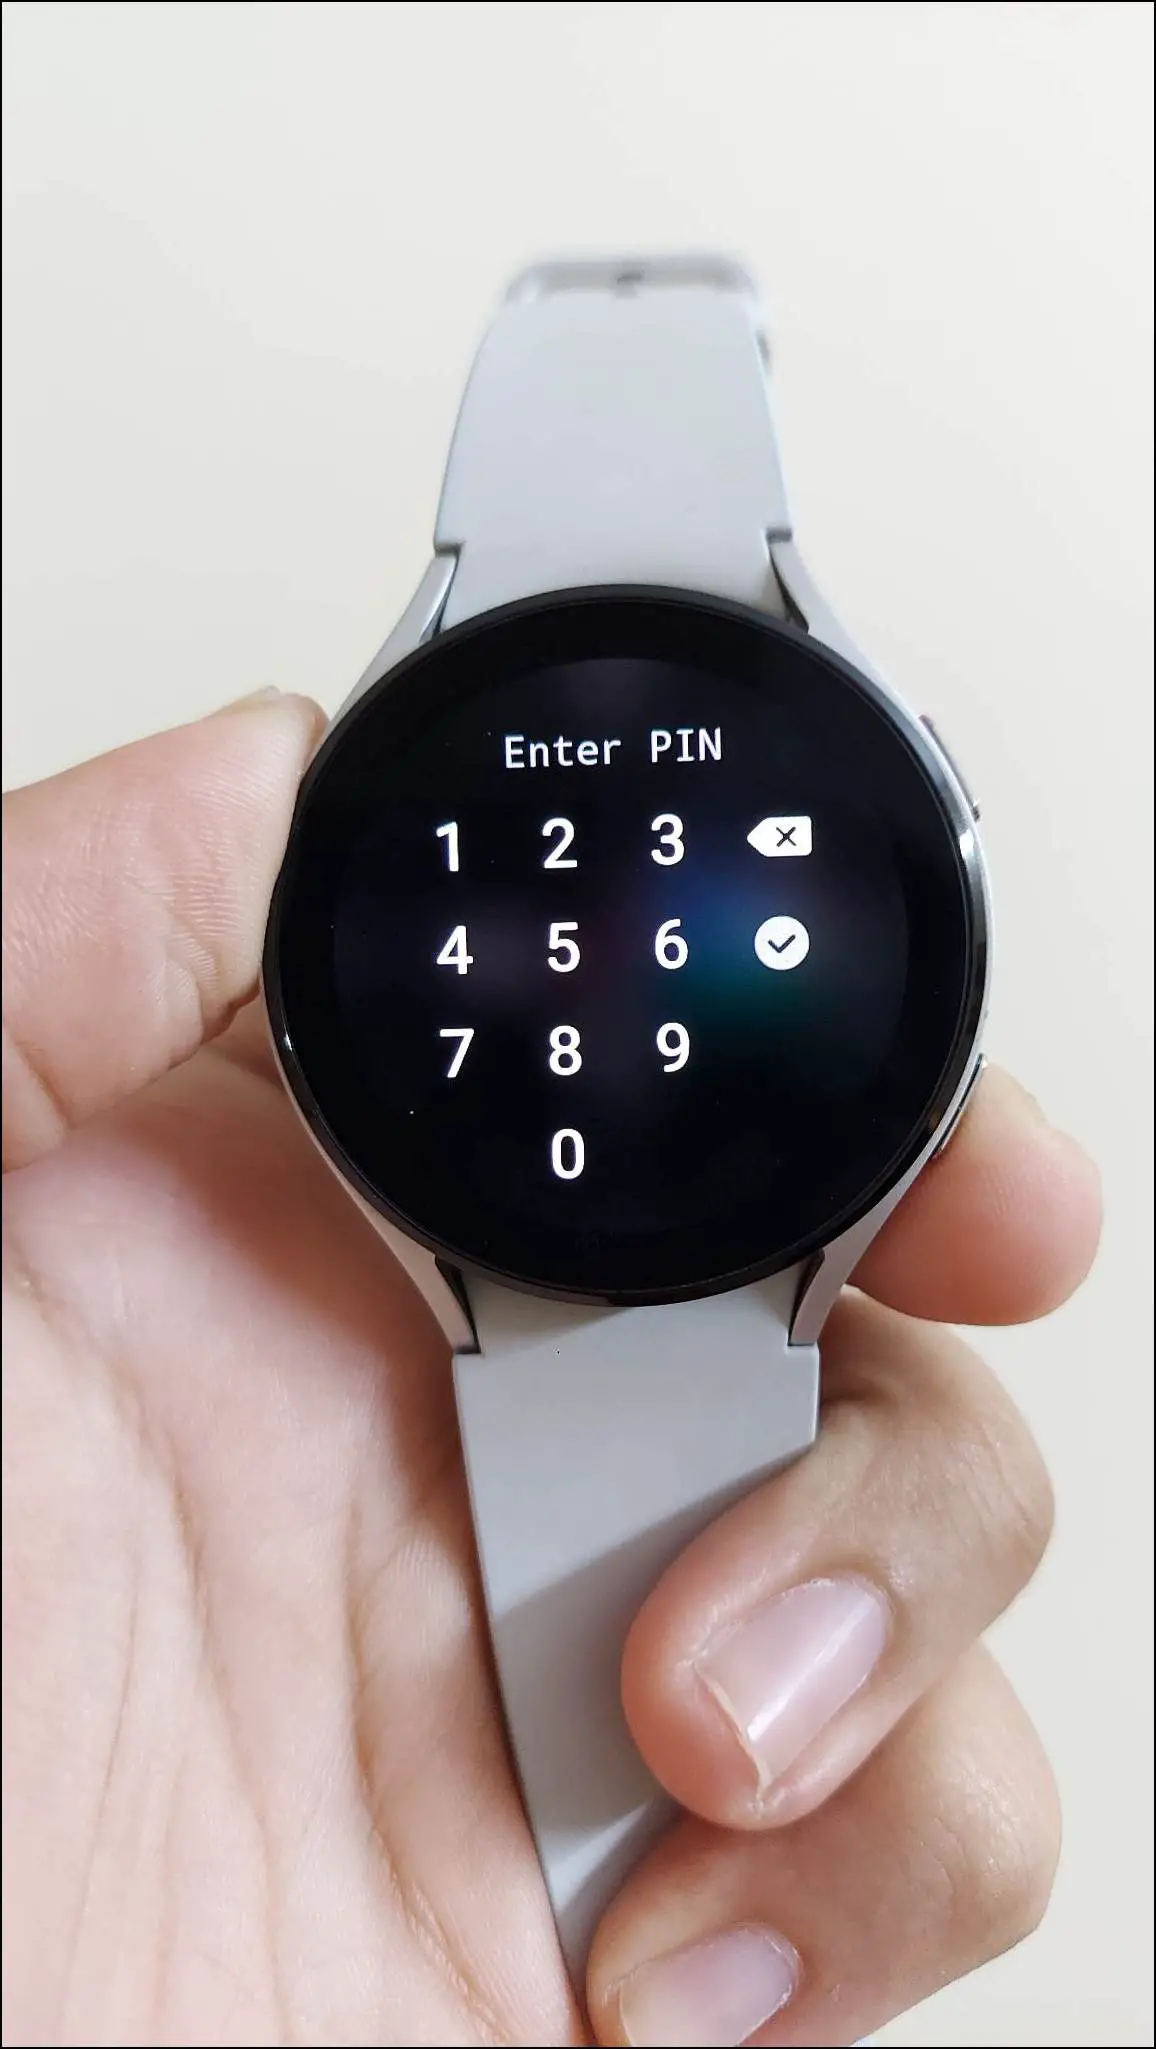 Setup Samsung Pay for Watch